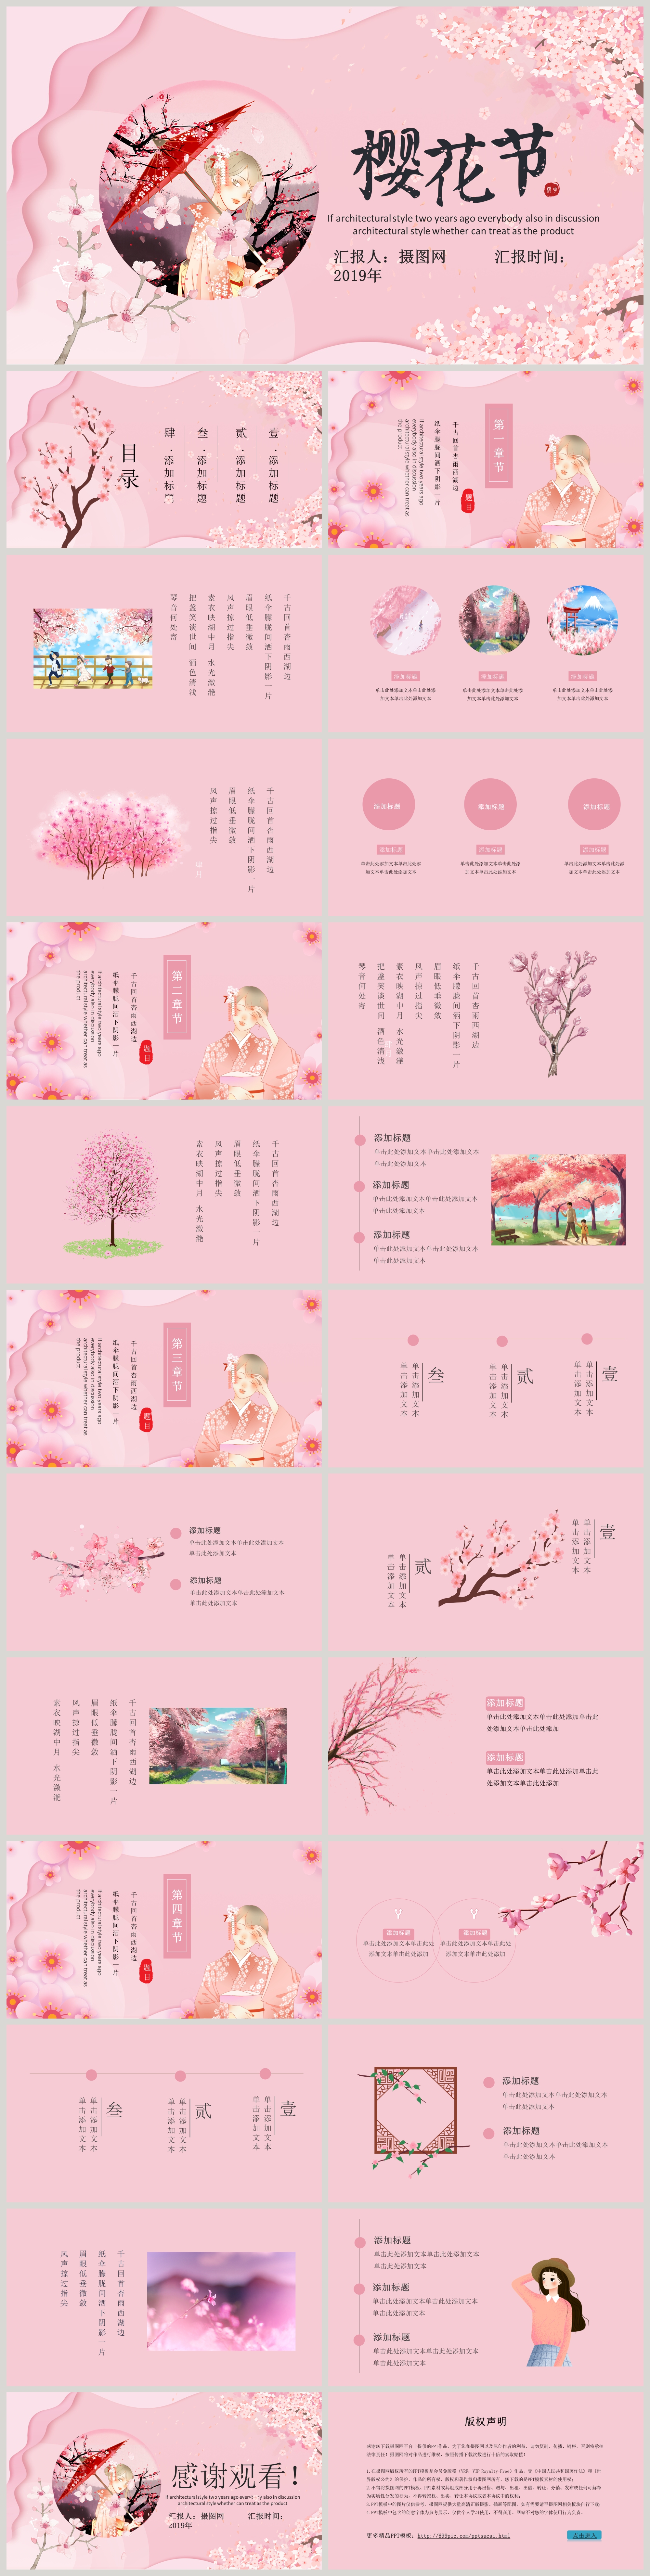 ppt-template-for-pink-cherry-blossom-festival-powerpoint-templete-ppt